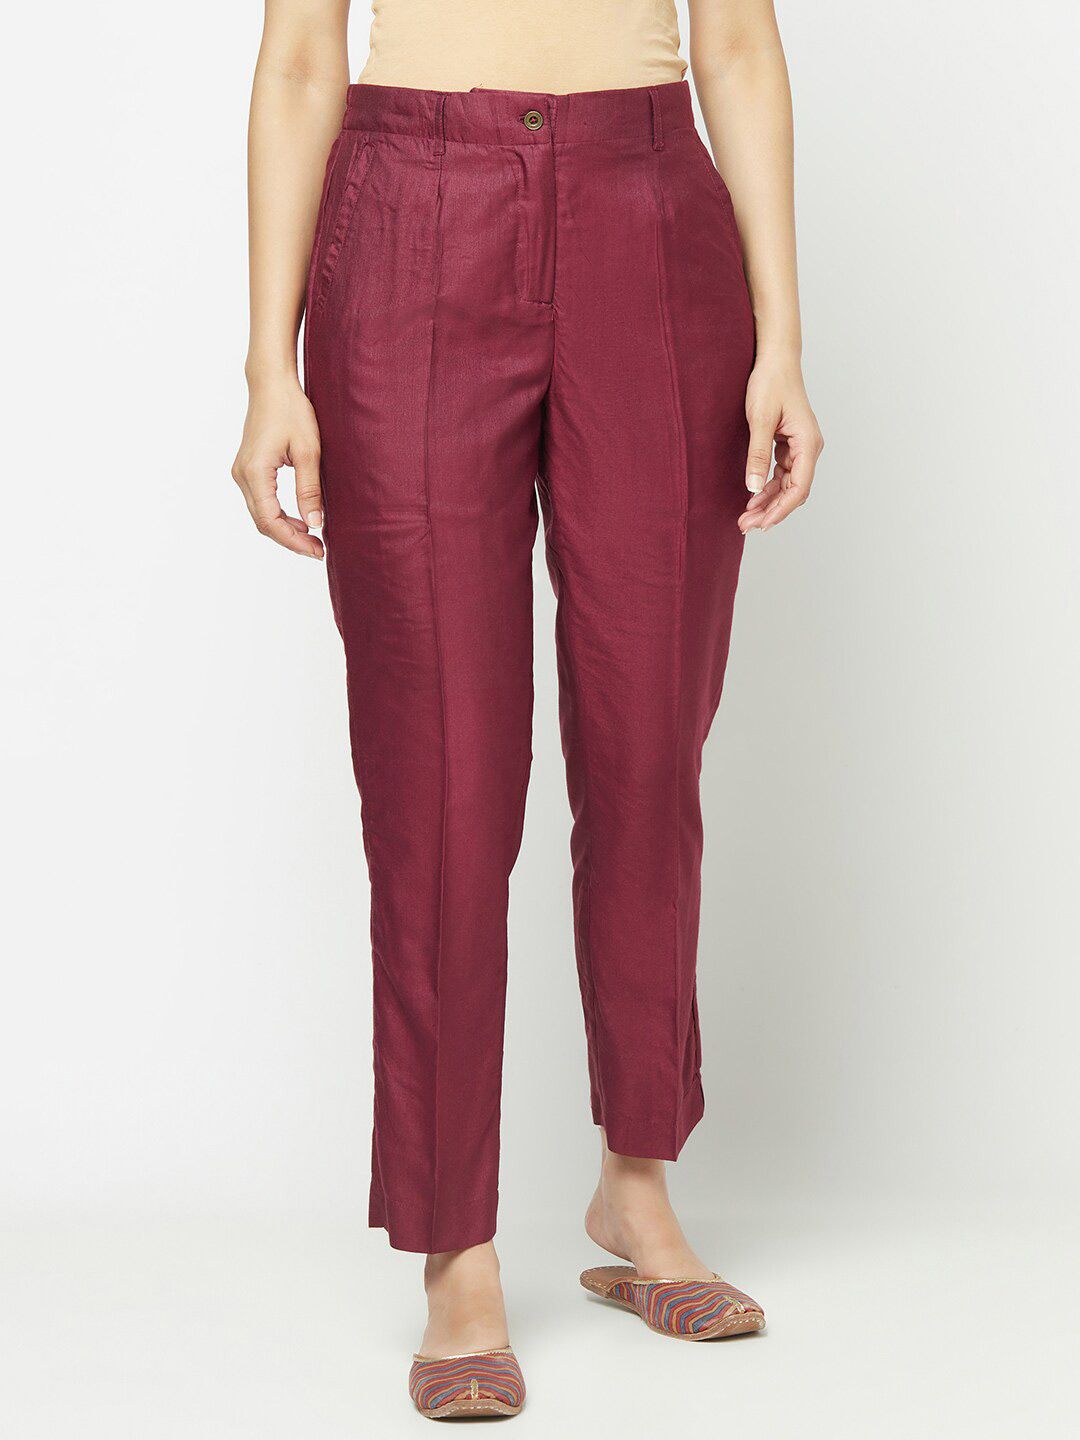 Fabindia Women Maroon Pleated Cigerette Trousers Price in India